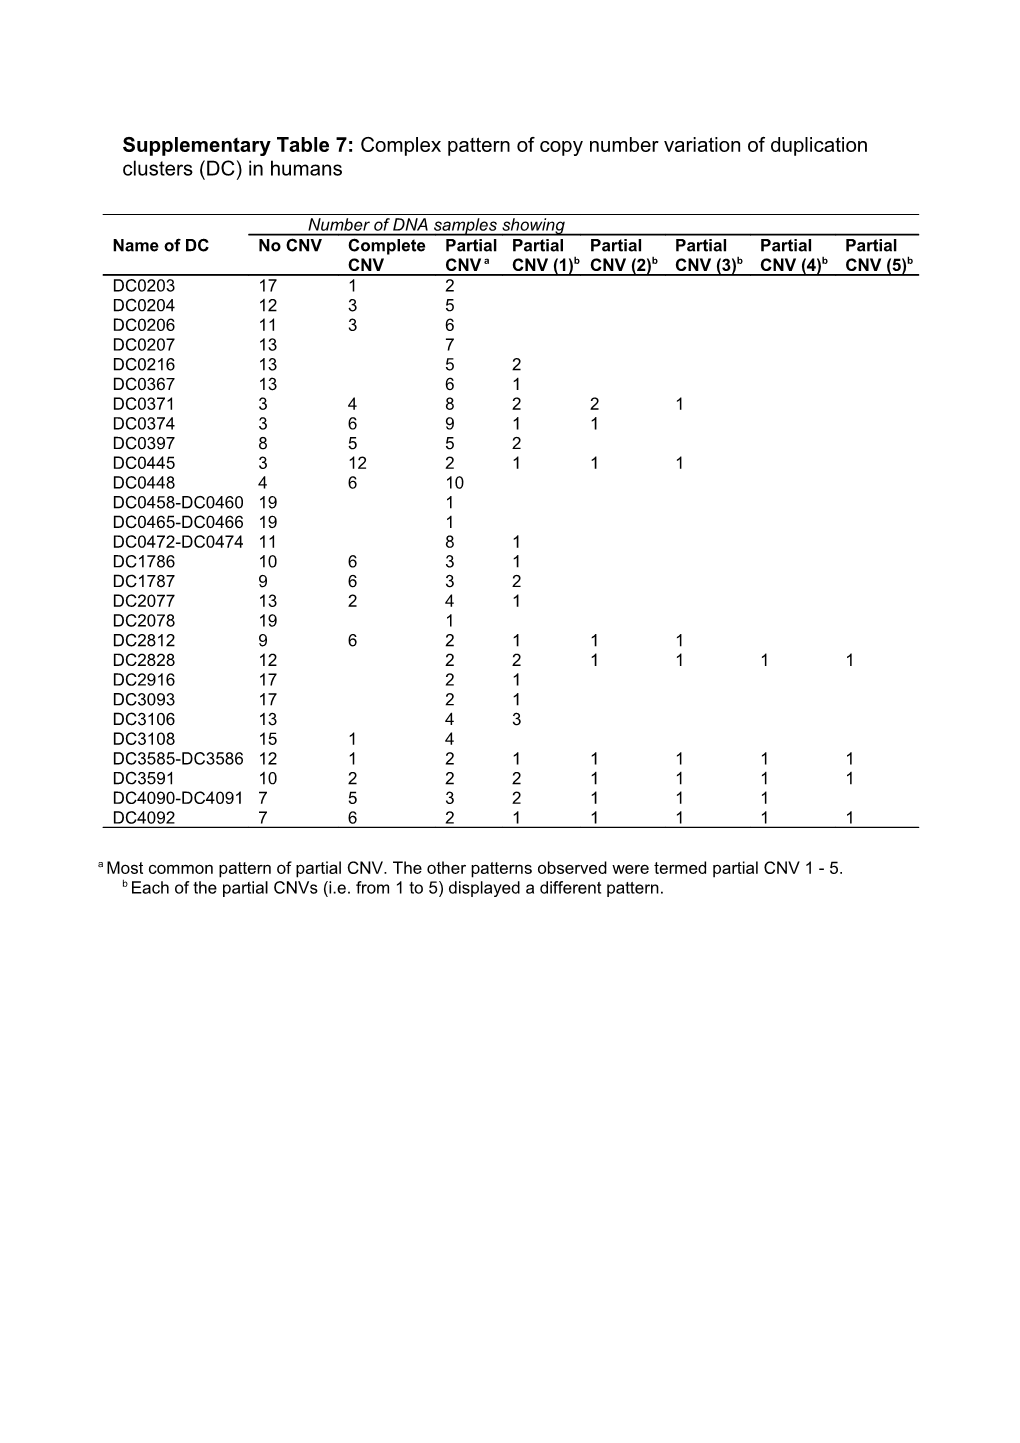 Supplementary Table 7: Complex Pattern of Copy Number Variation of Duplication Clusters